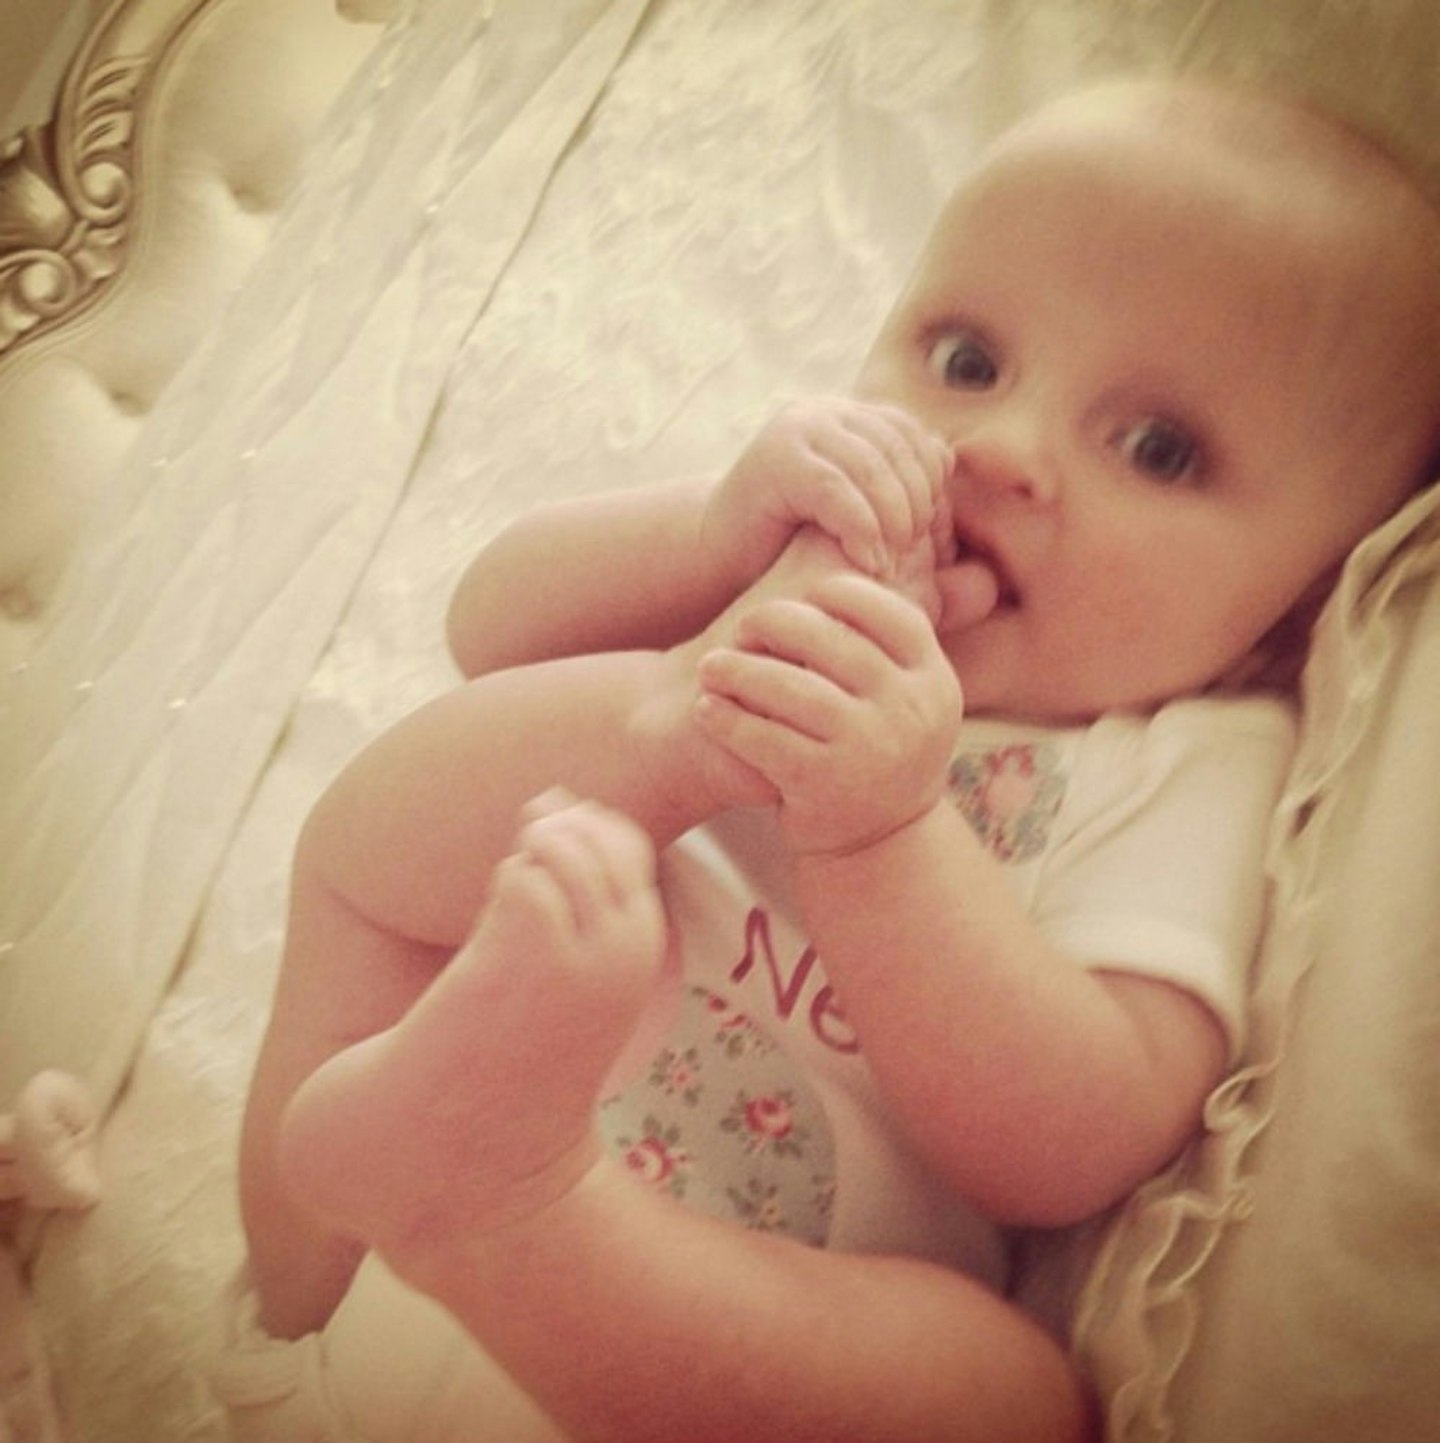 billie-faiers-baby-nellie-picture